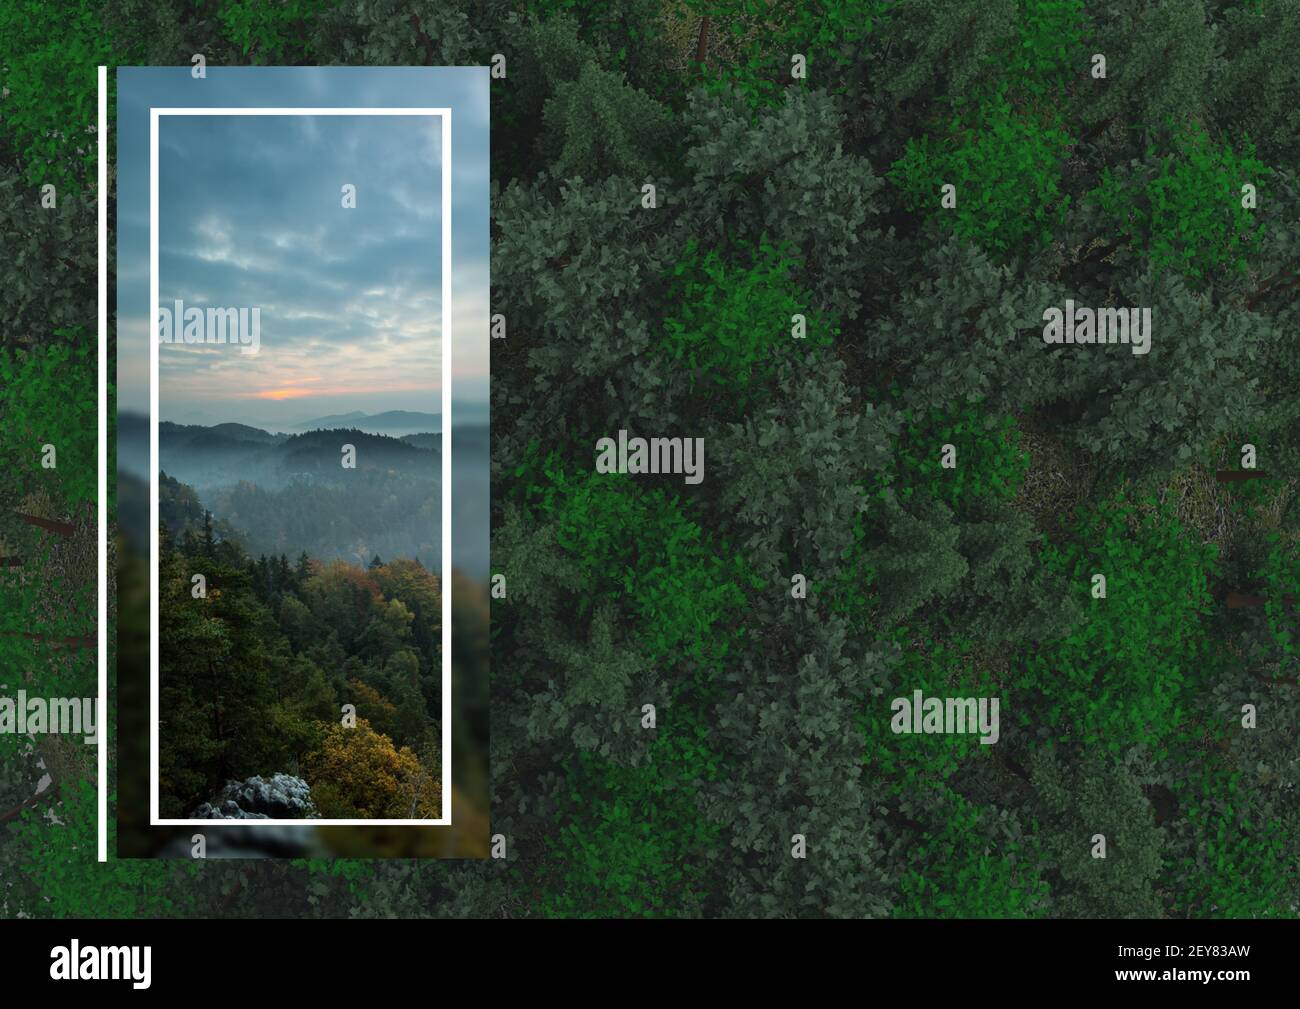 Illustration with mountain landscape photo over forest in background Stock Photo